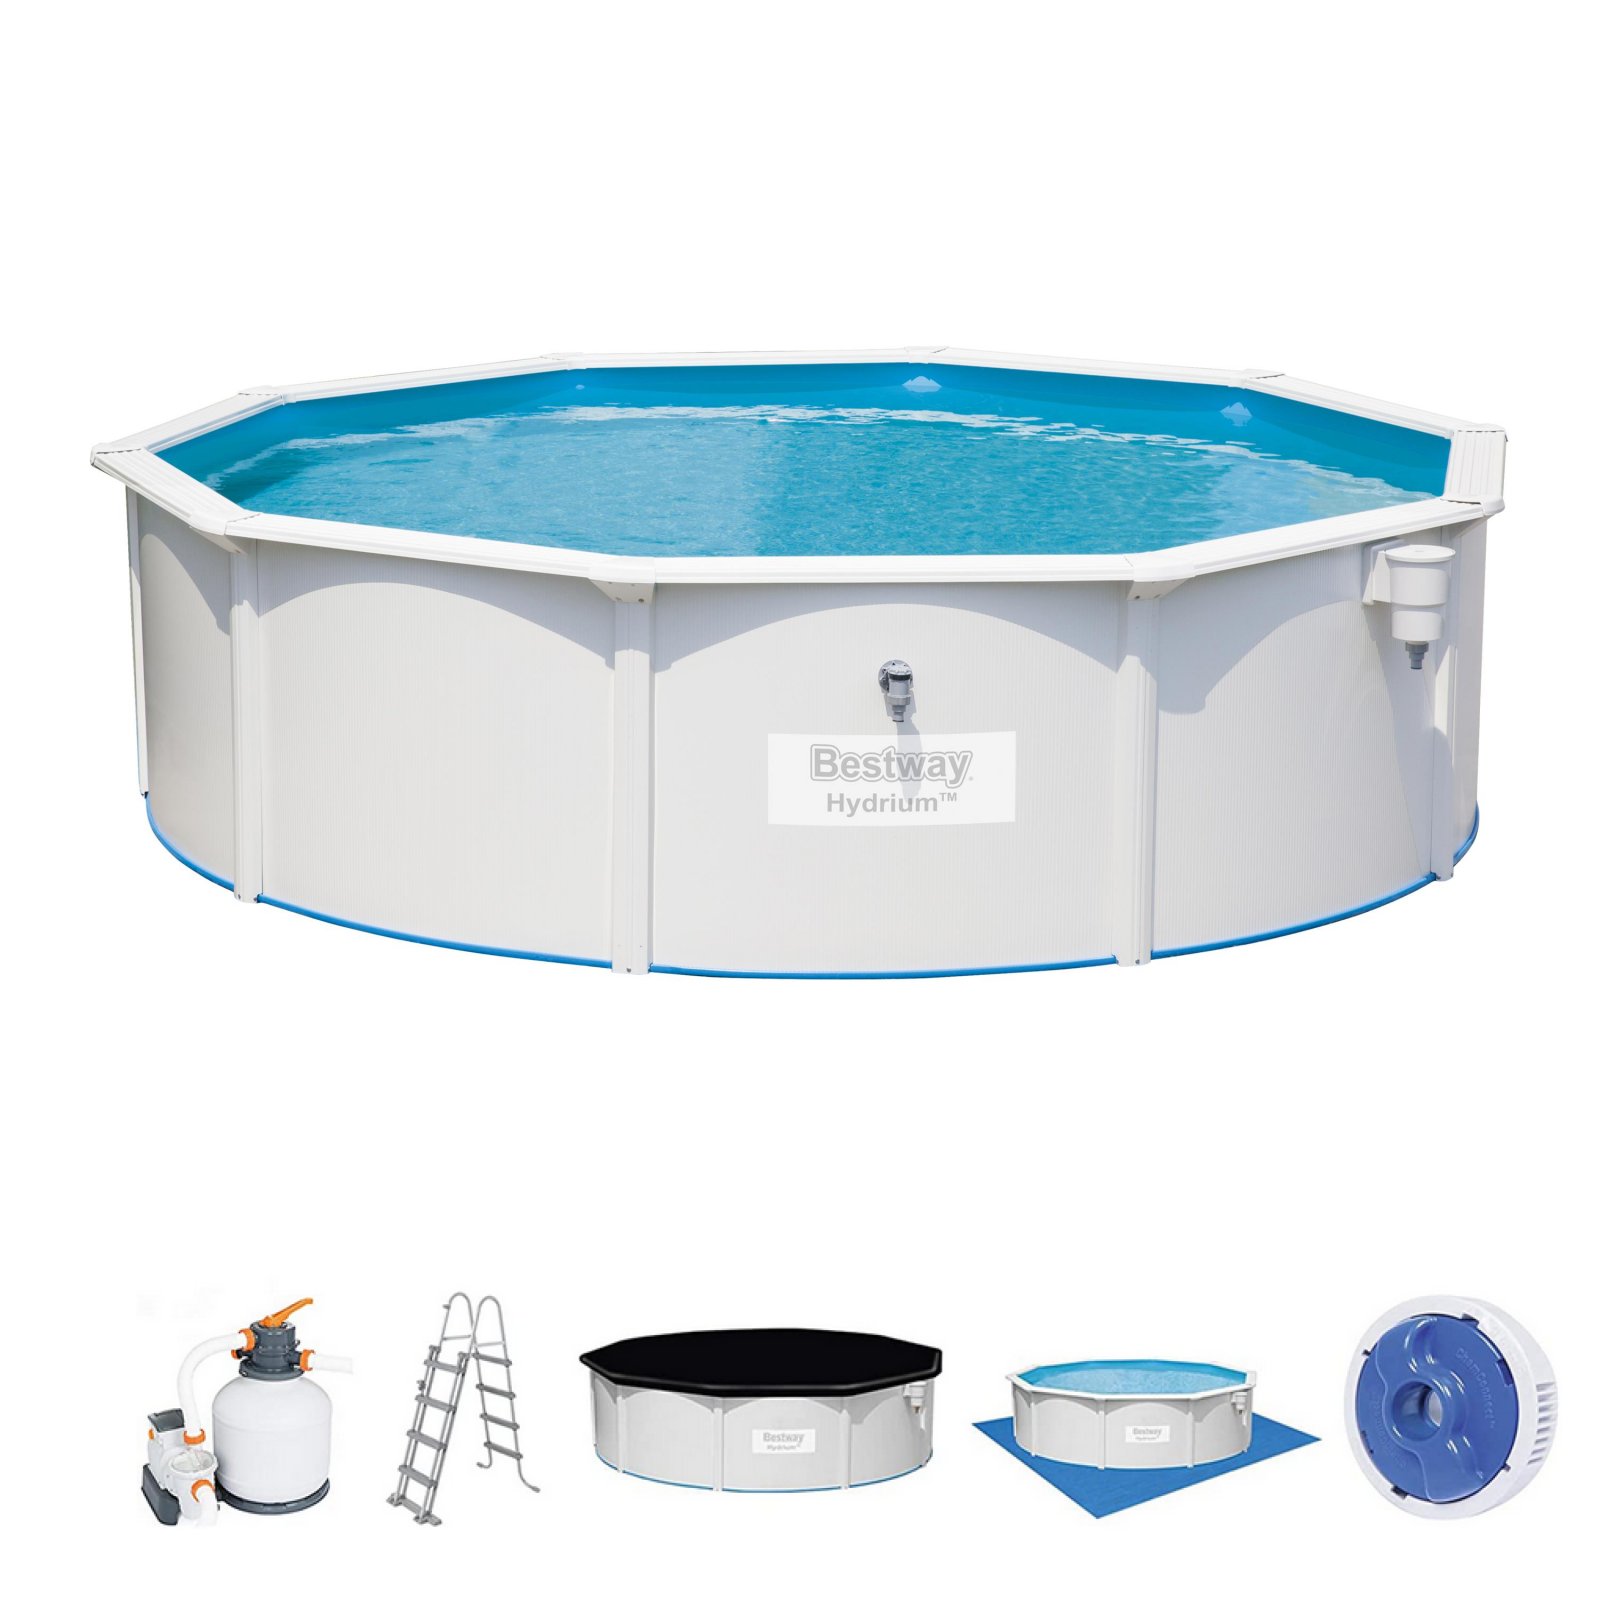 Full Set Fast Delivery 56384 BESTWAY PISCINA HYDRIUM 460x120cm 